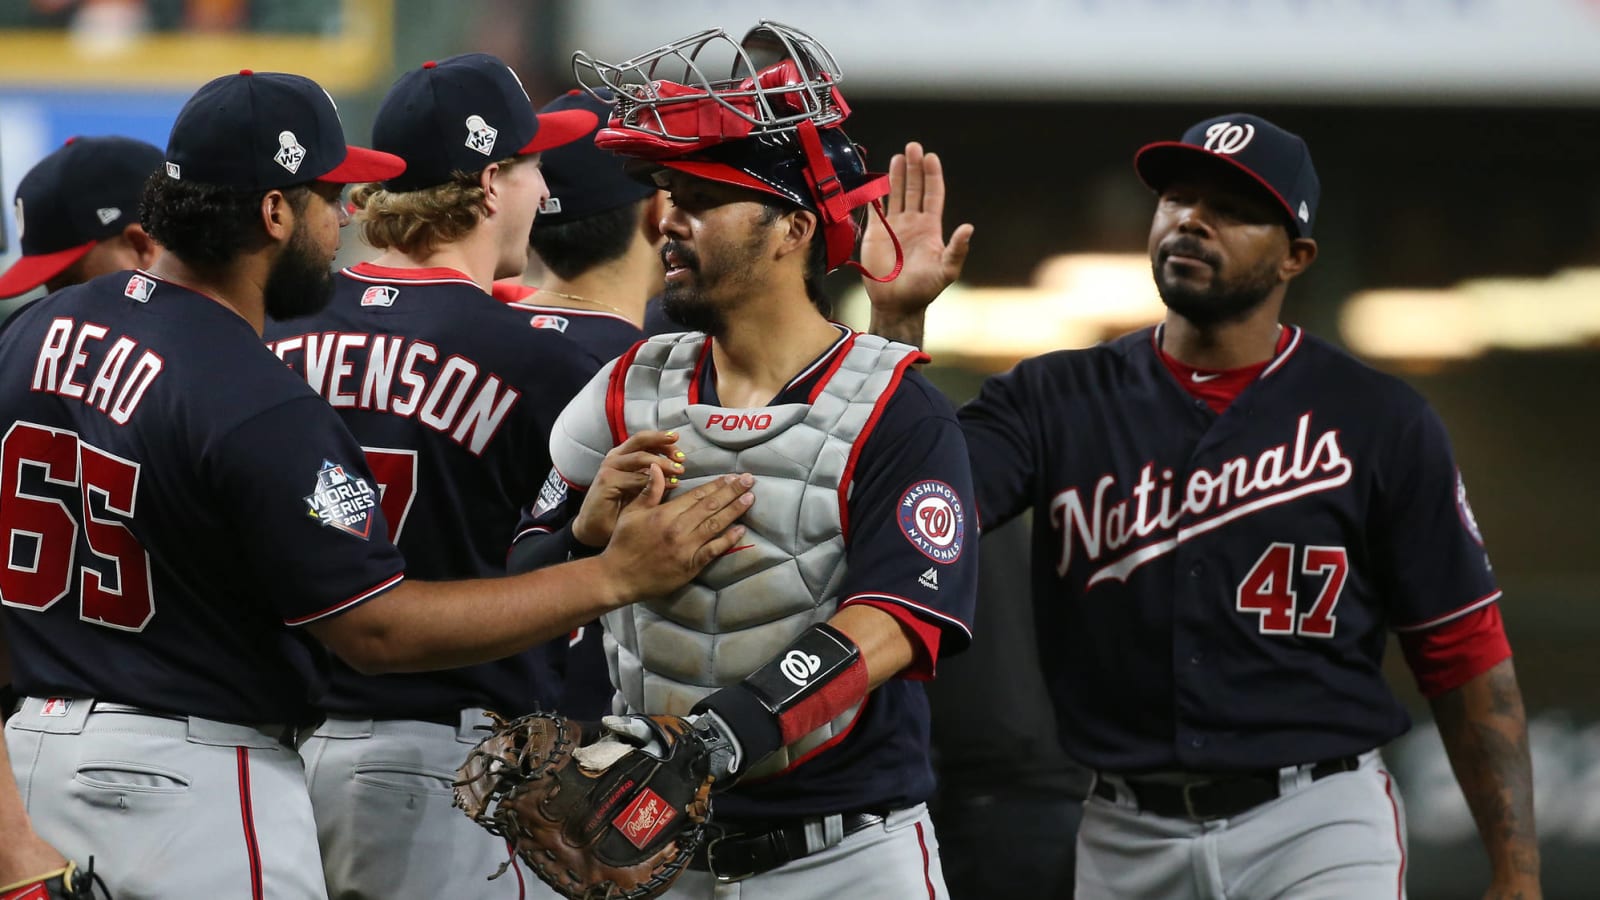 Winners, losers from the Nationals' dominating Game 2 win